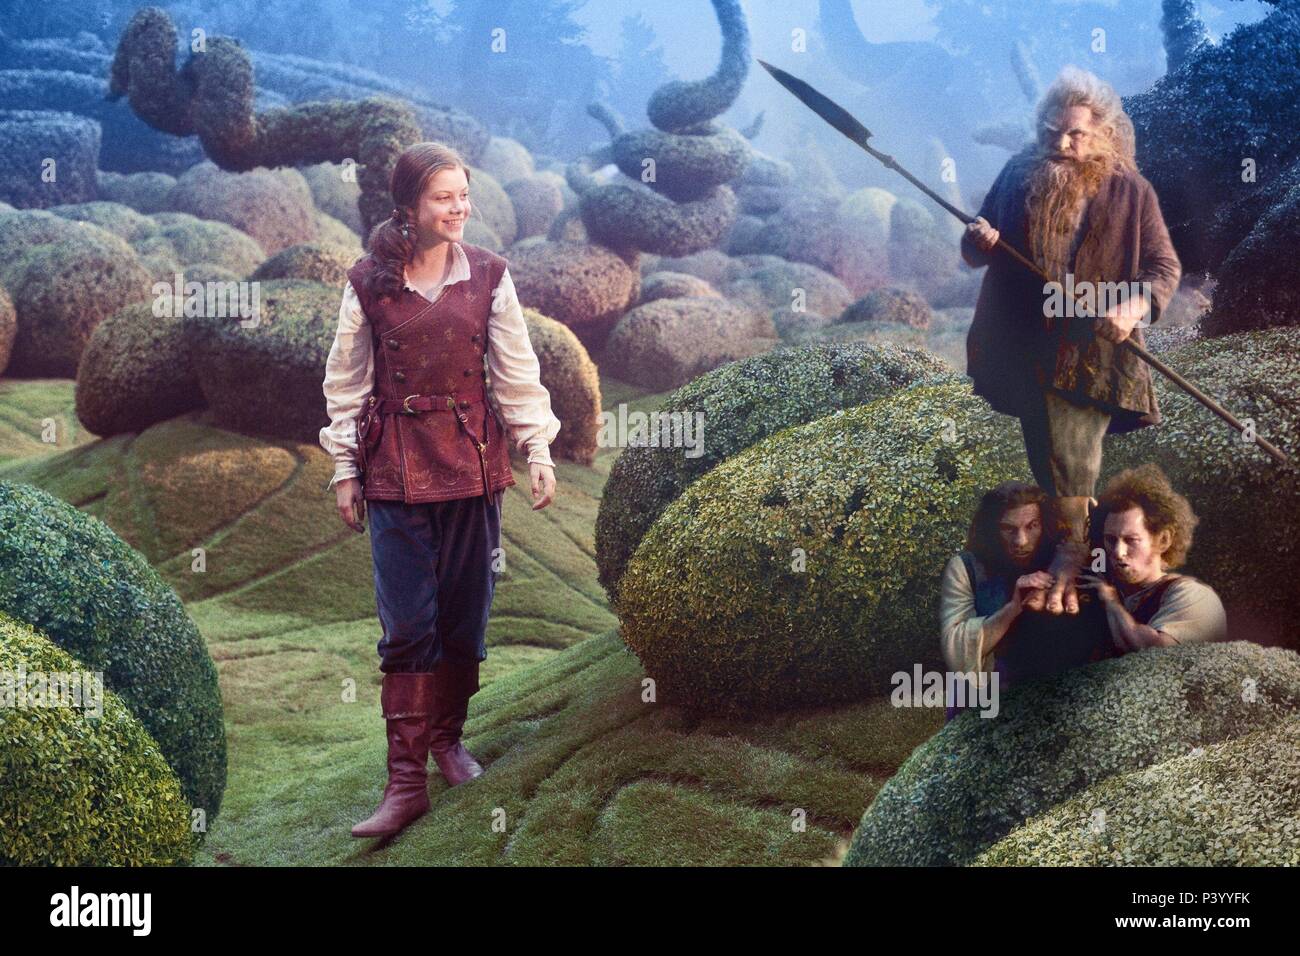 Original Film Title: CHRONICLES OF NARNIA, THE: THE VOYAGE OF THE DAWN TREADER.  English Title: CHRONICLES OF NARNIA, THE: THE VOYAGE OF THE DAWN TREADER.  Film Director: MICHAEL APTED.  Year: 2010.  Stars: GEORGIE HENLEY. Credit: 20TH CENTURY FOX / Album Stock Photo